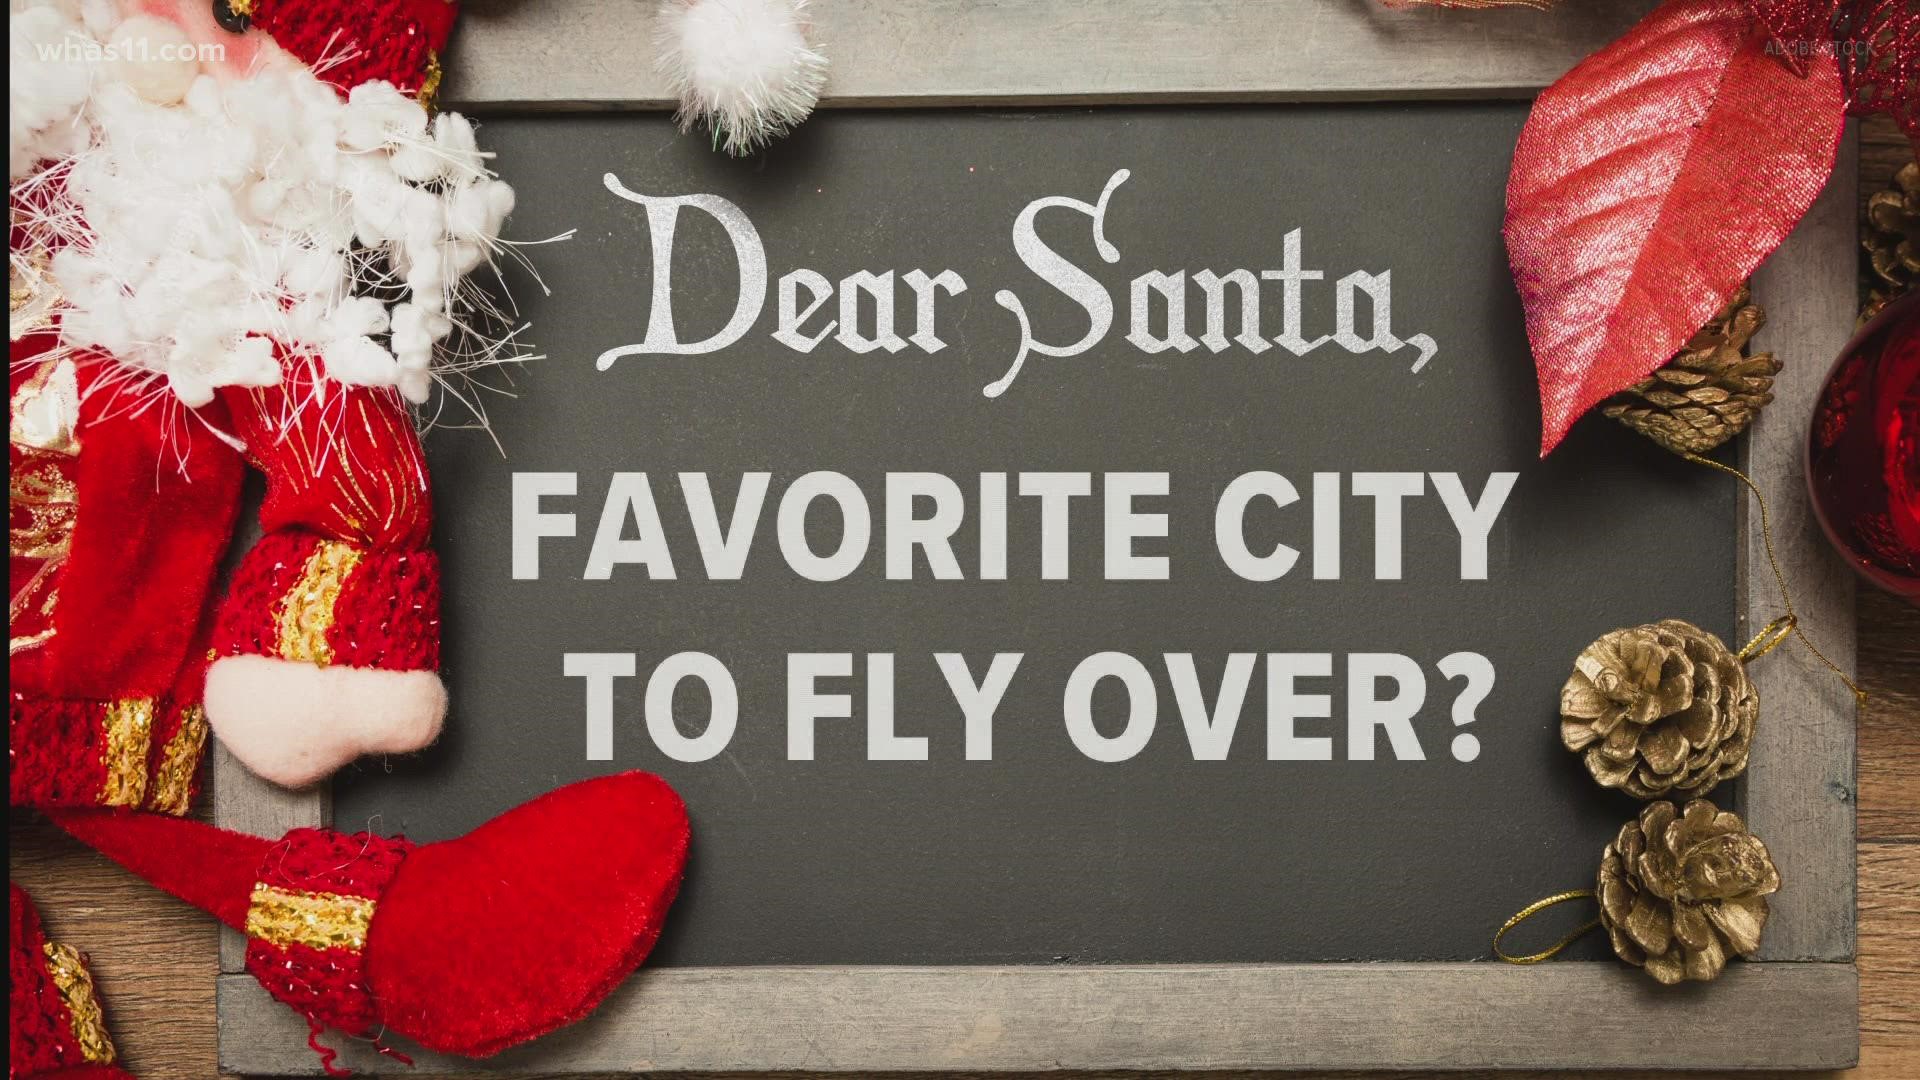 Santa is coming! Here's where he says are his favorite places to go over.